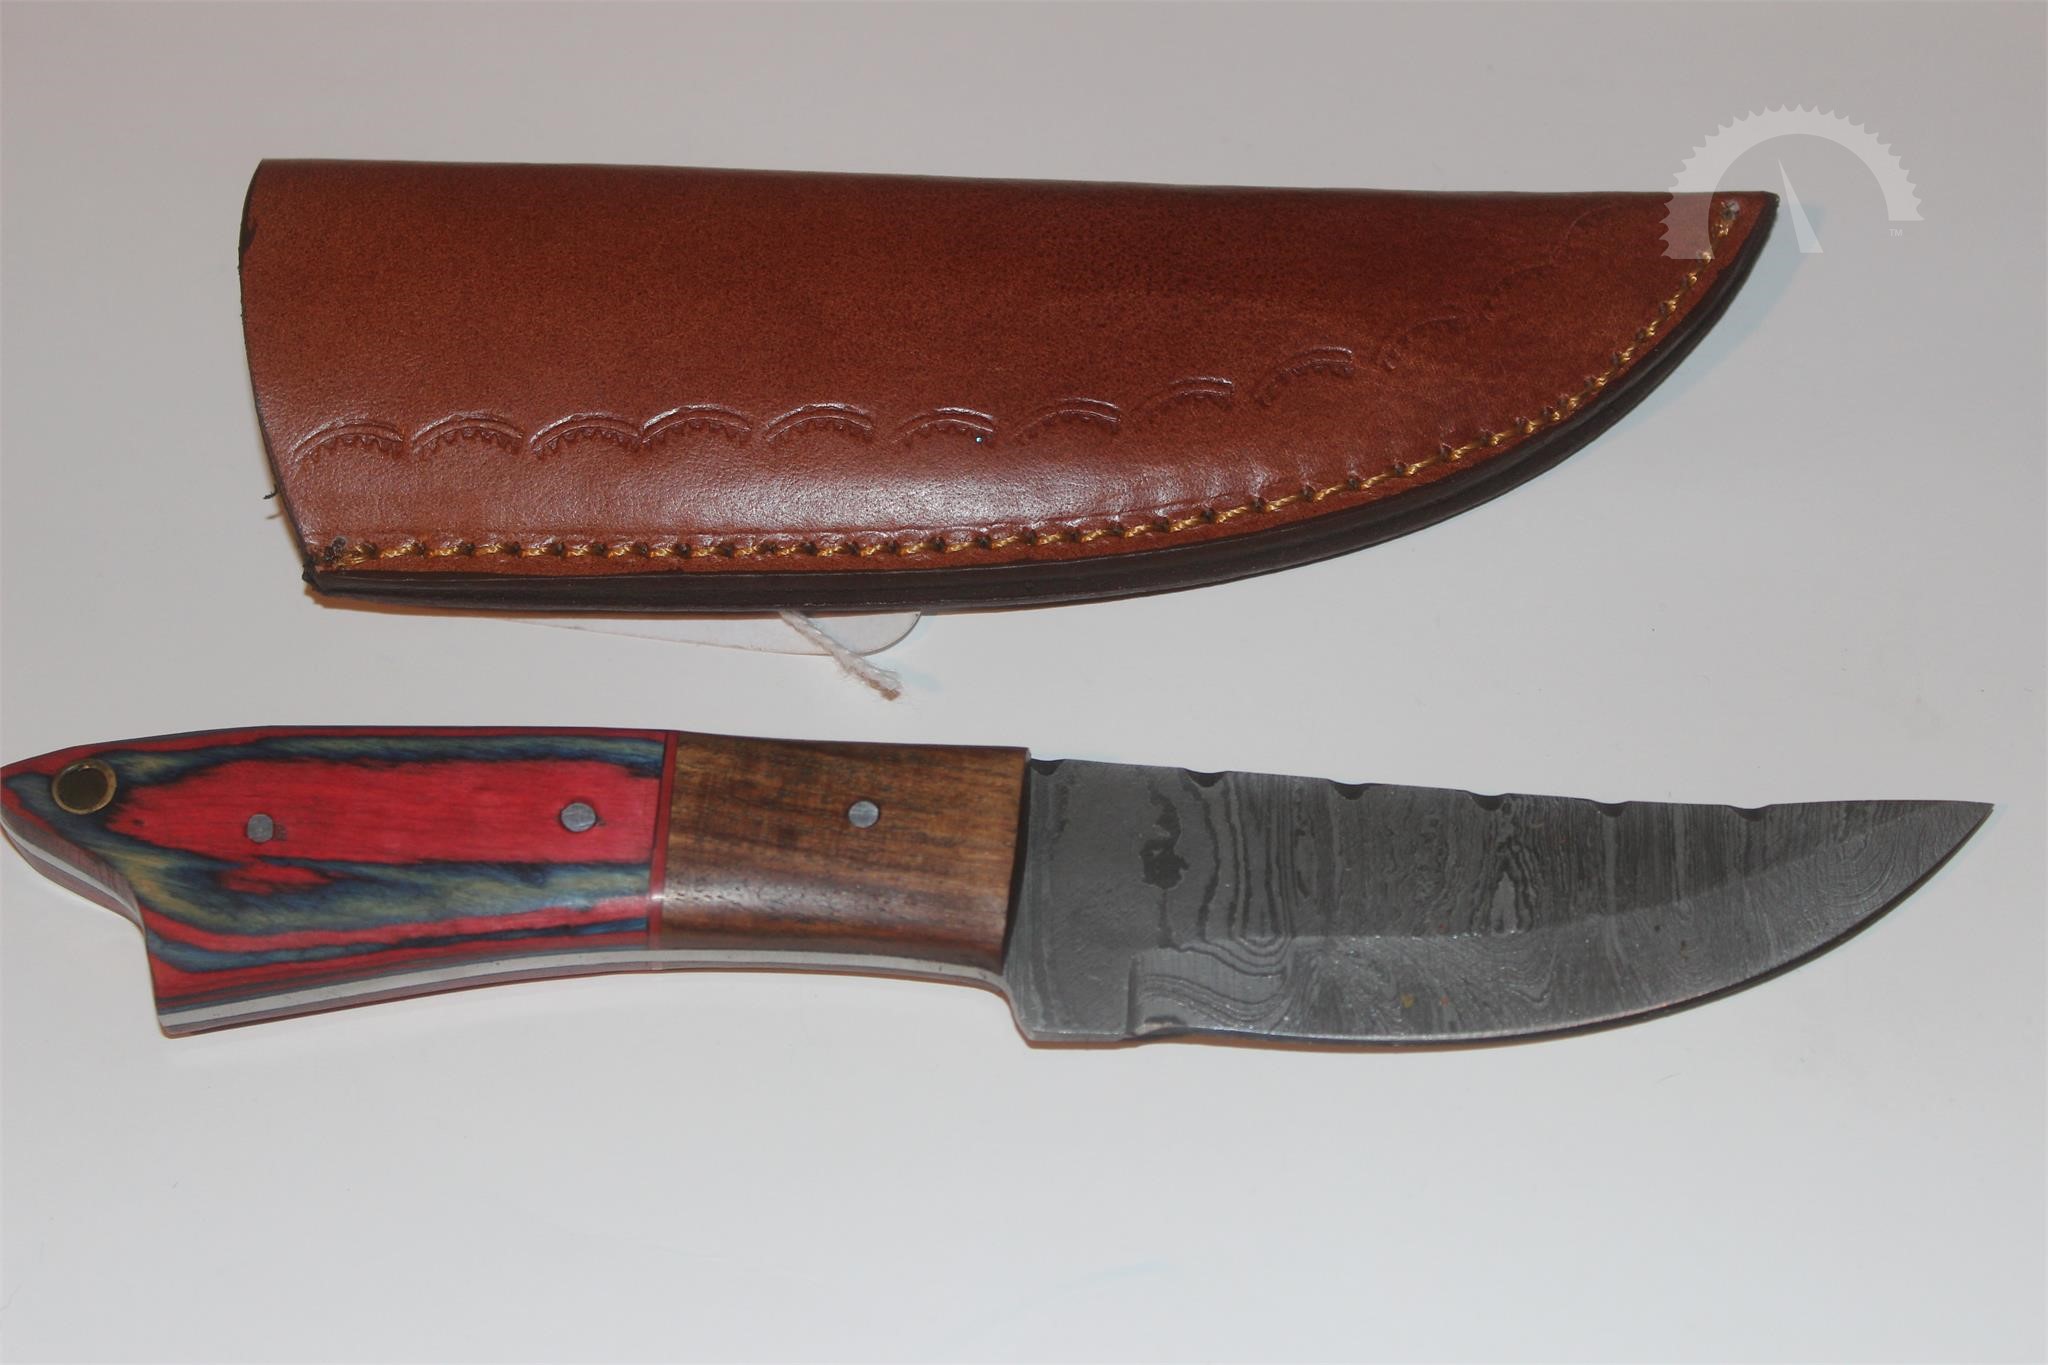 Sold at Auction: Hand-forged hay knife